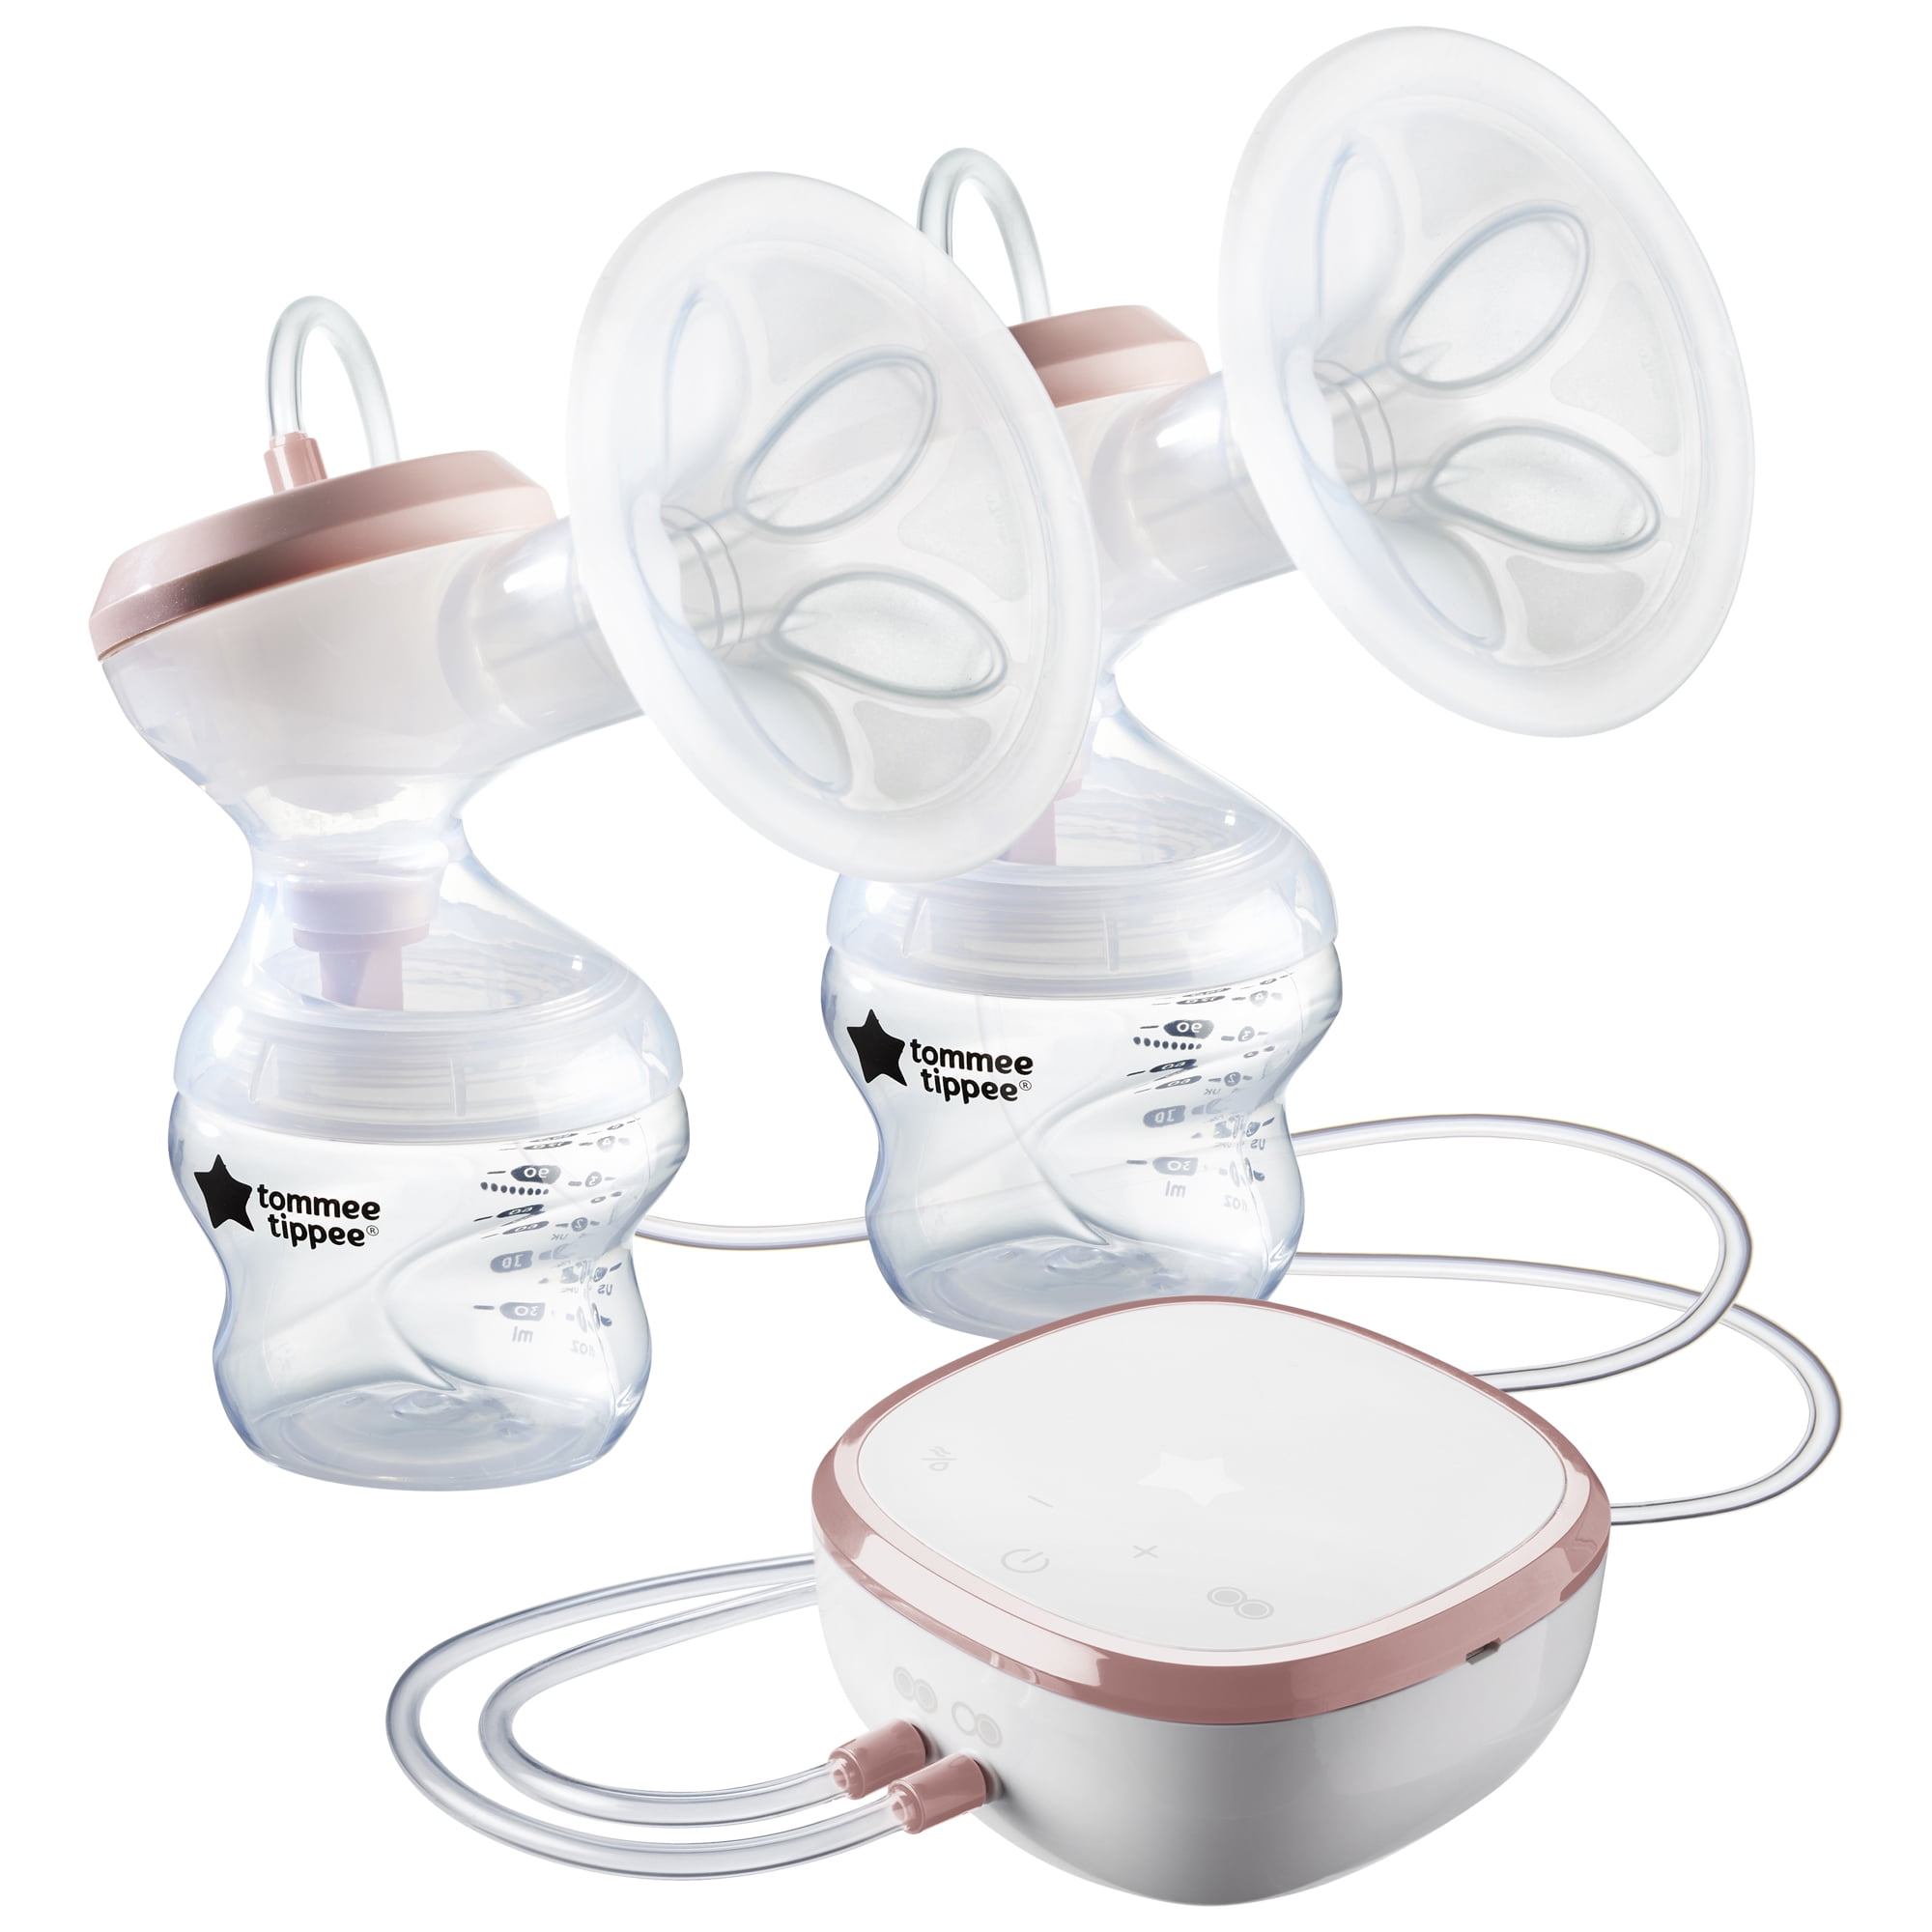 Tommee Tippee Made for Me Double Electric Breast Pump, USB Rechargeable - Baby Bottles Included